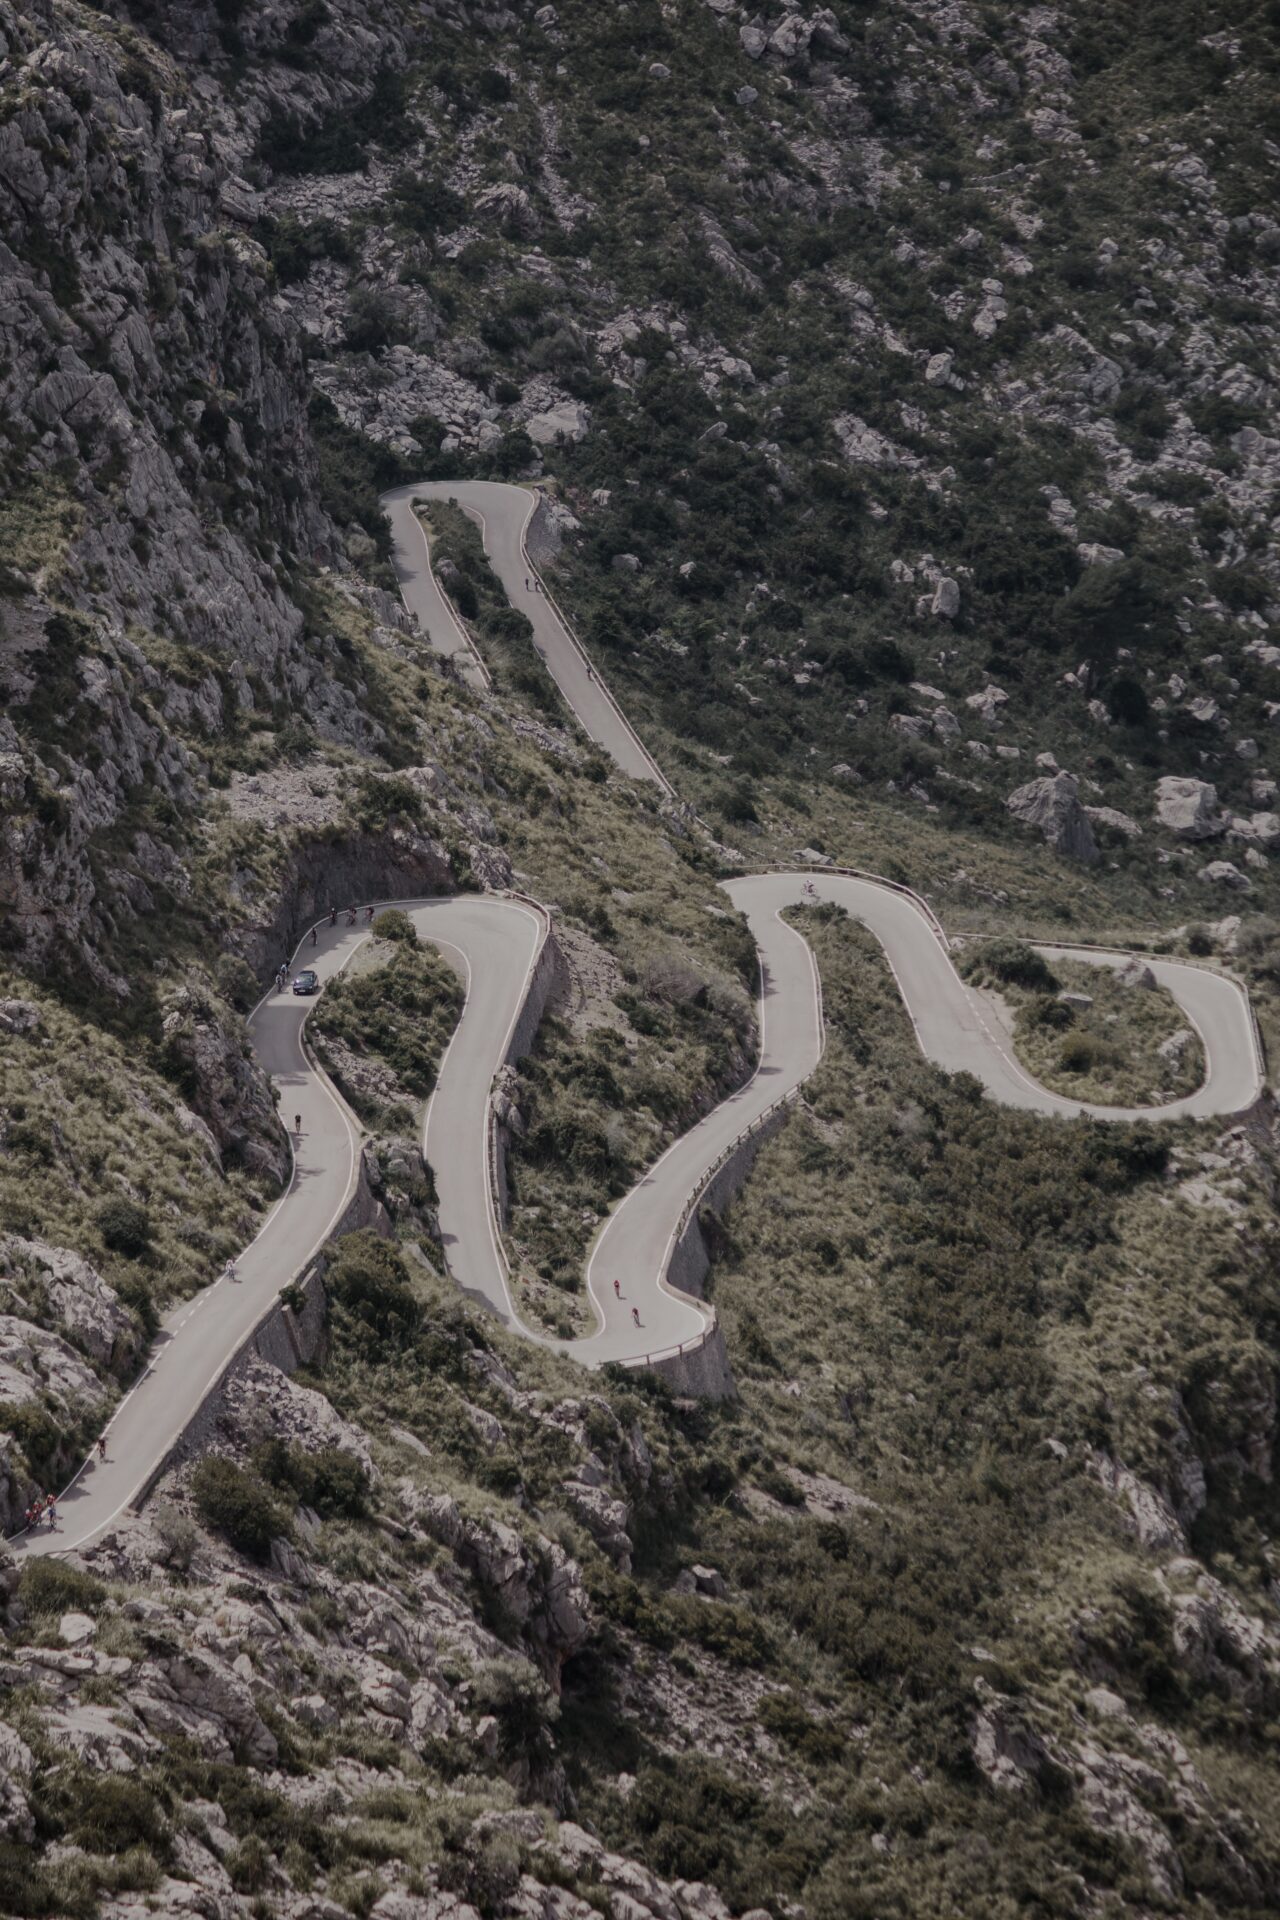 Overhead photo of cyclists riding up a twisting mountain road (Photo by Nicklas from Pexels)